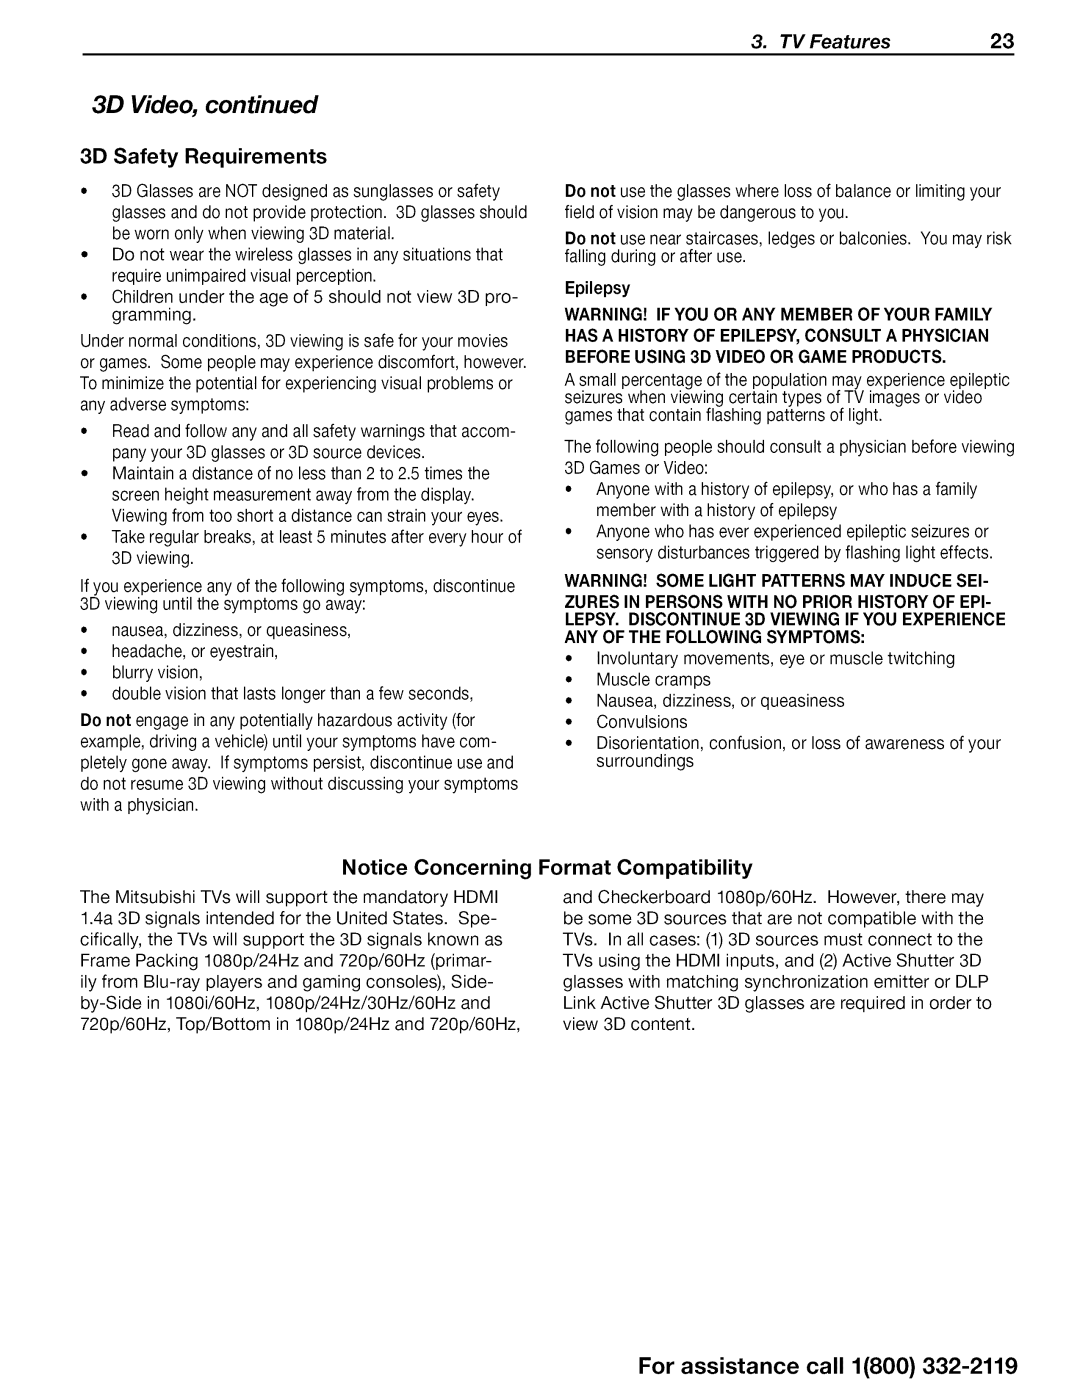 Mitsubishi Electronics WD-73640, WD-73CA1 3D Safety Requirements, Notice Concerning, Format Compatibility, Epilepsy 